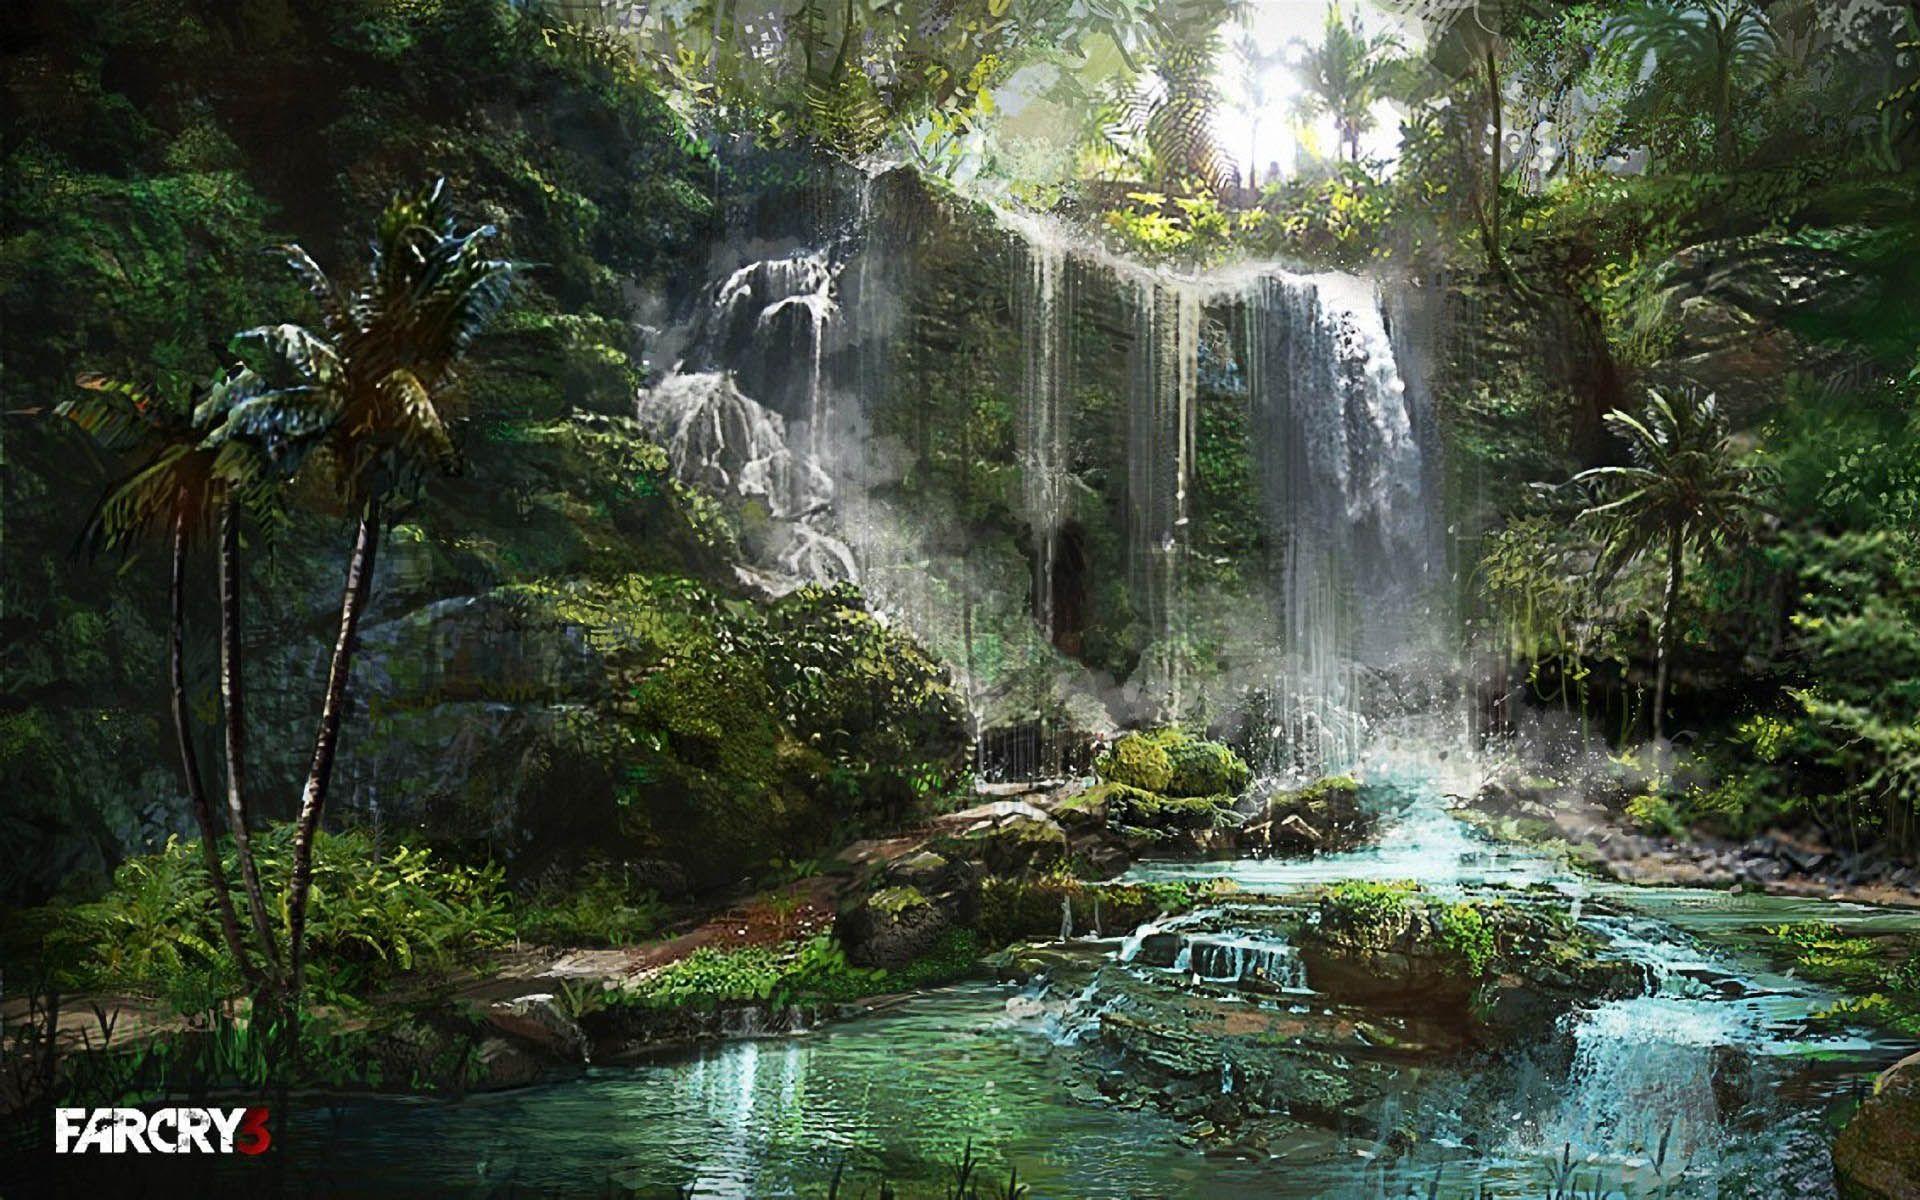 Top Far Cry 3 HQ Pictures, Far Cry 3 WD+69 Wallpapers